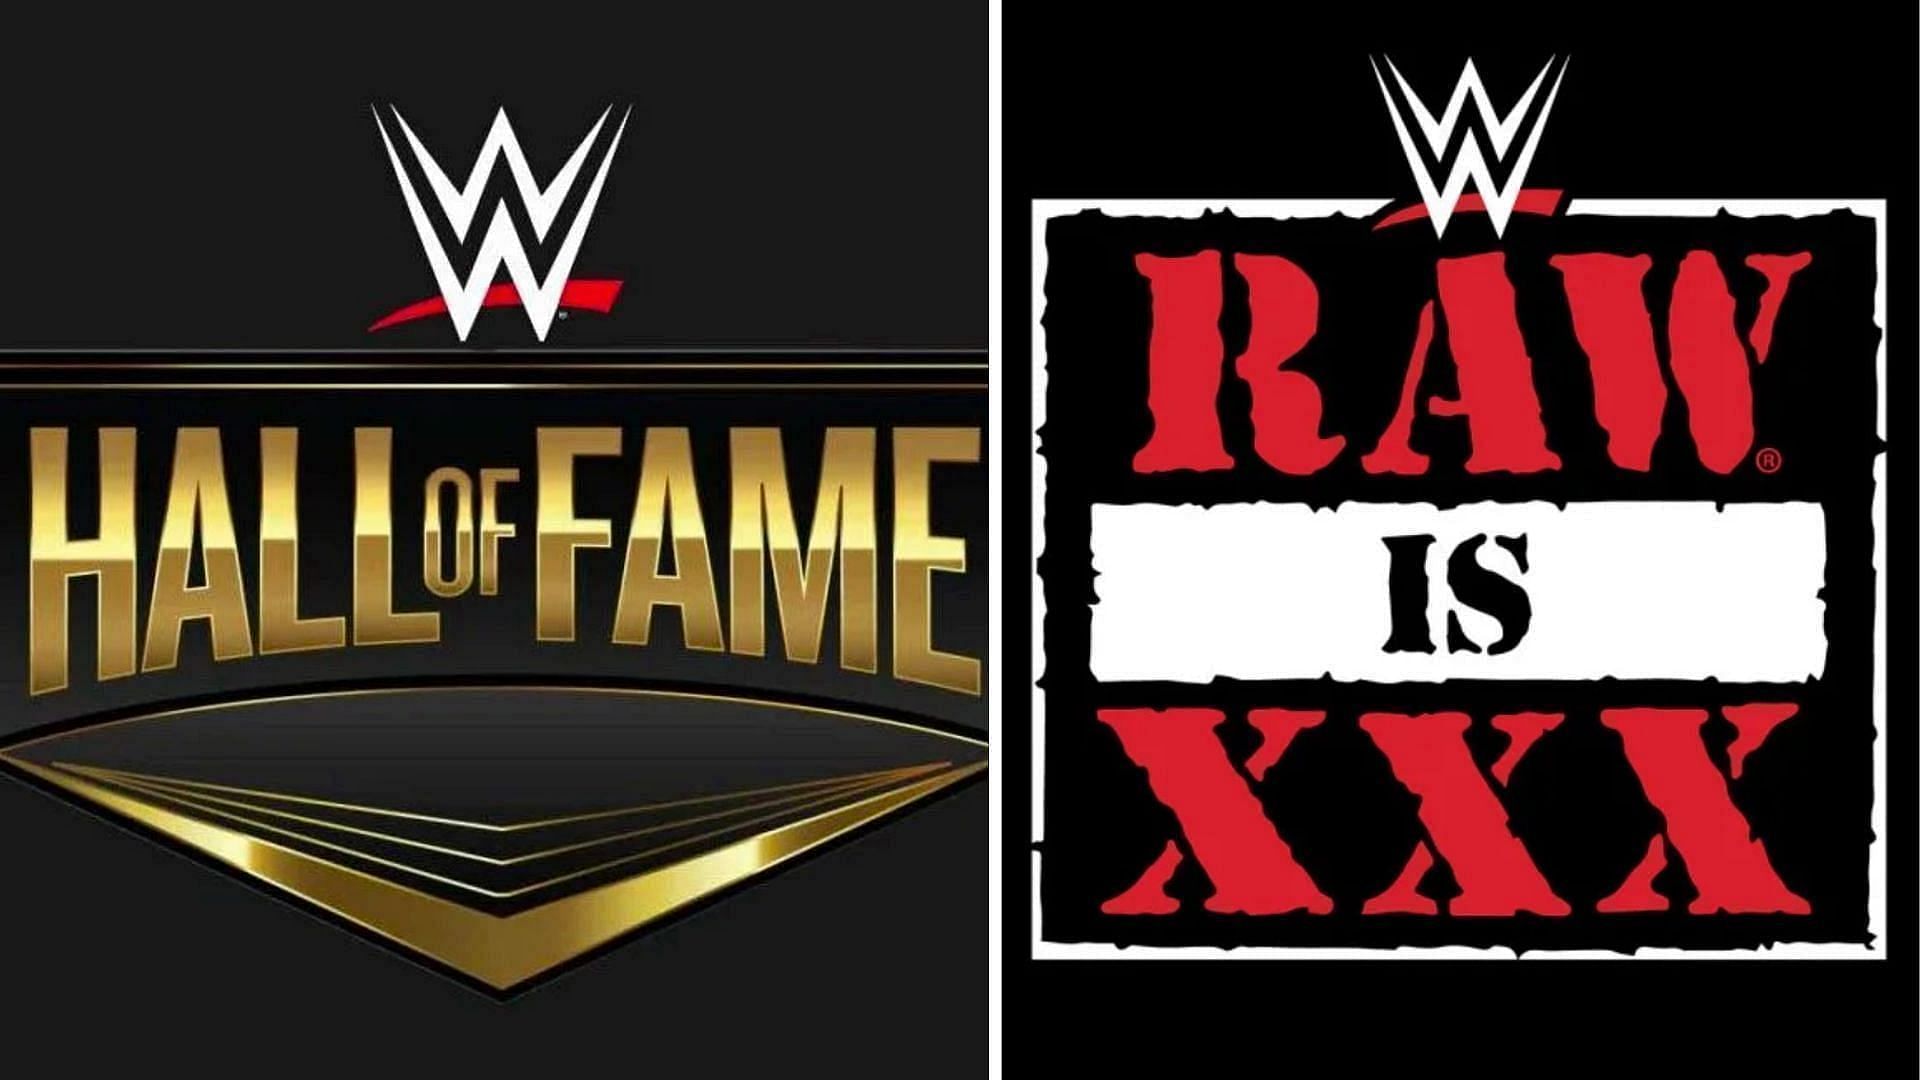 The names announced for this special RAW show continue to grow.